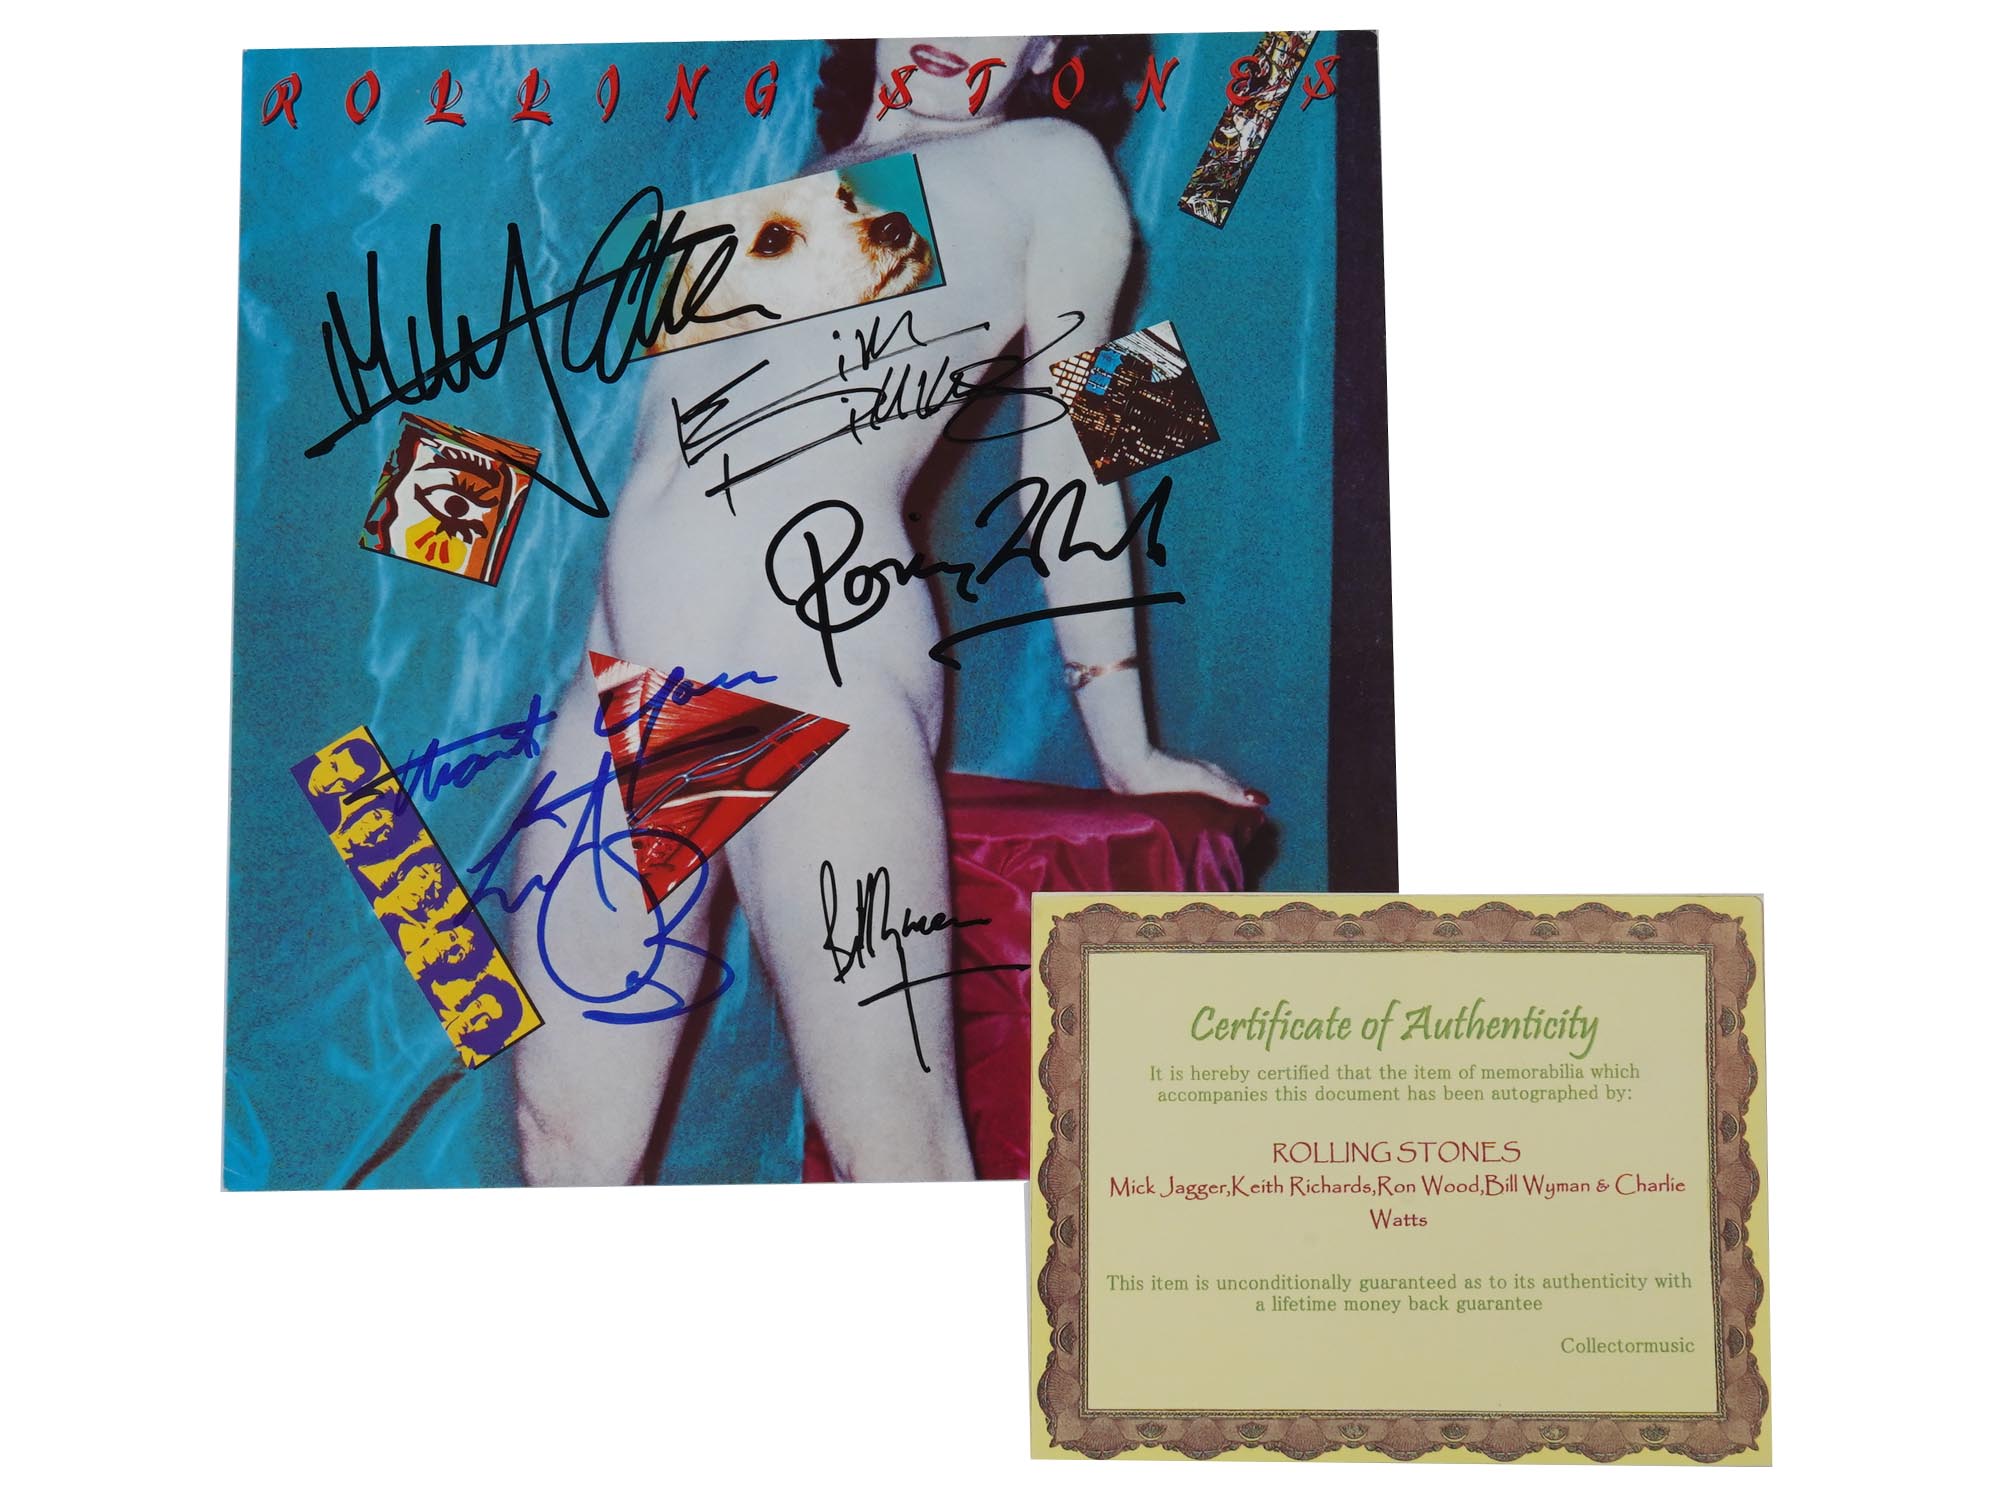 1983 ROLLING STONES VINYL COVER WITH AUTHOGRAPHS PIC-0